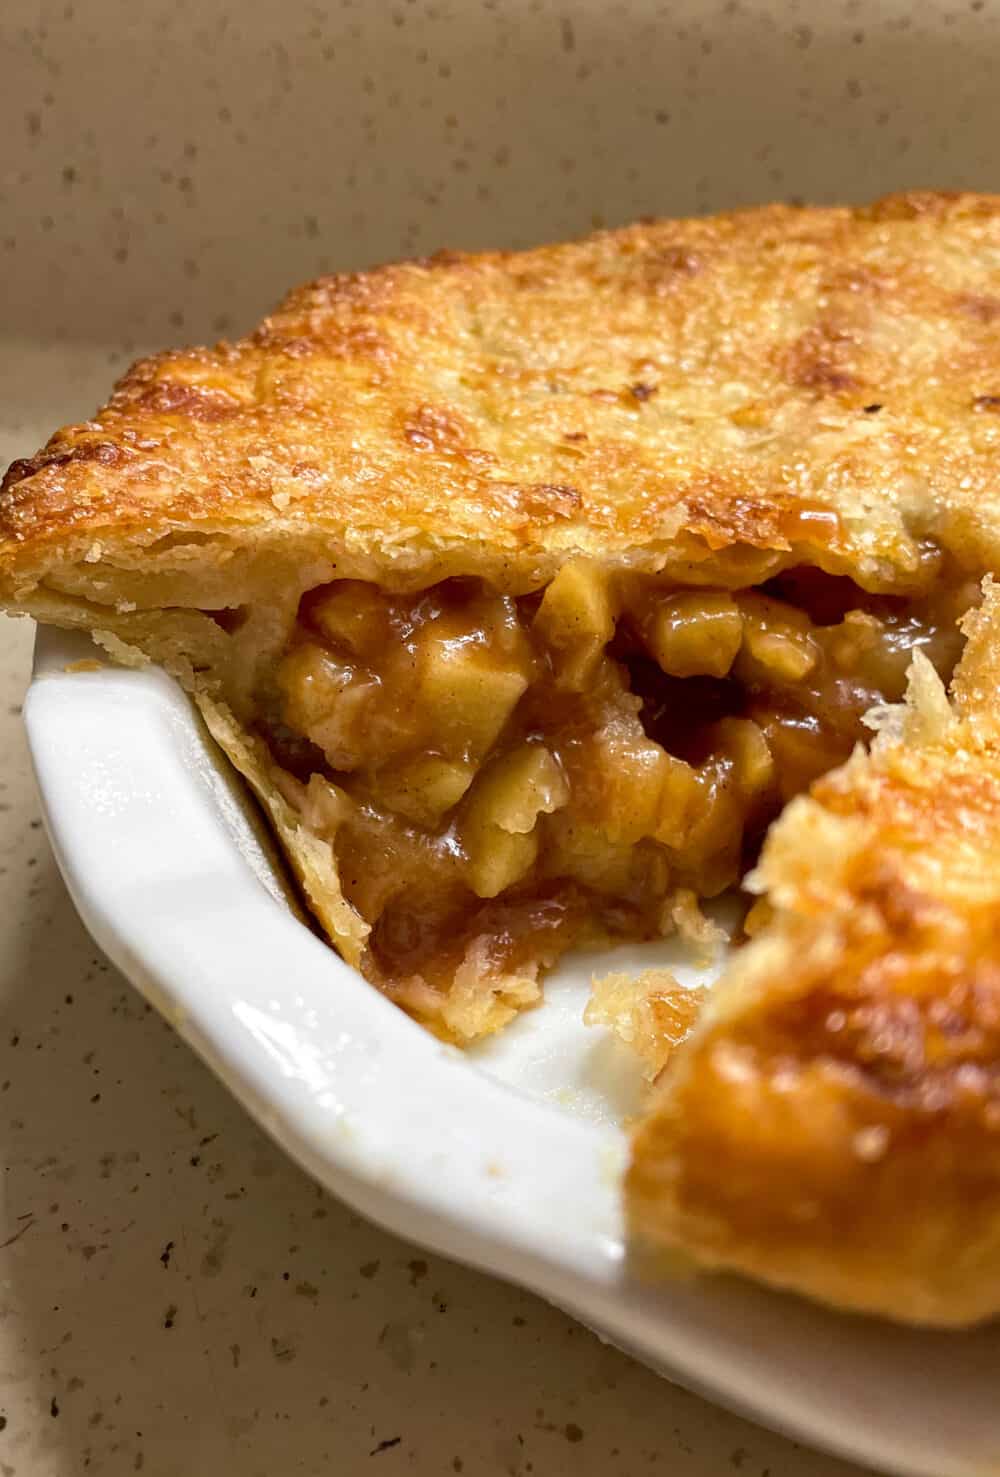 An apple pie with a slice taken out, revealing the sweet, spiced apple filling inside